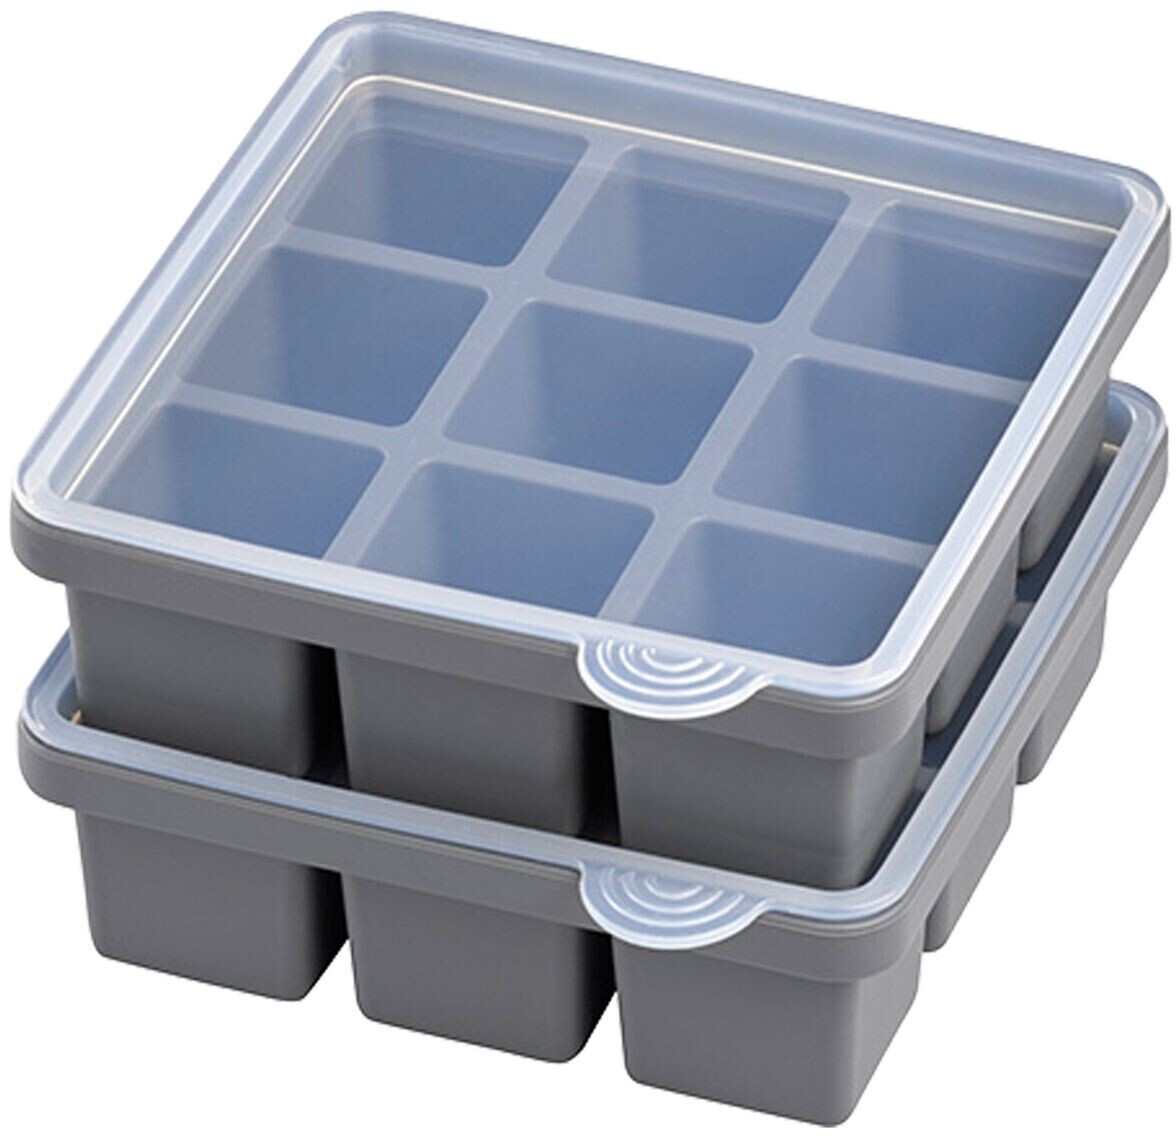 36102, Germany pieces lid, set, ab | 9 € 11,17 bei flexible cubes, cube 2 APS base, mold with Preisvergleich Ice